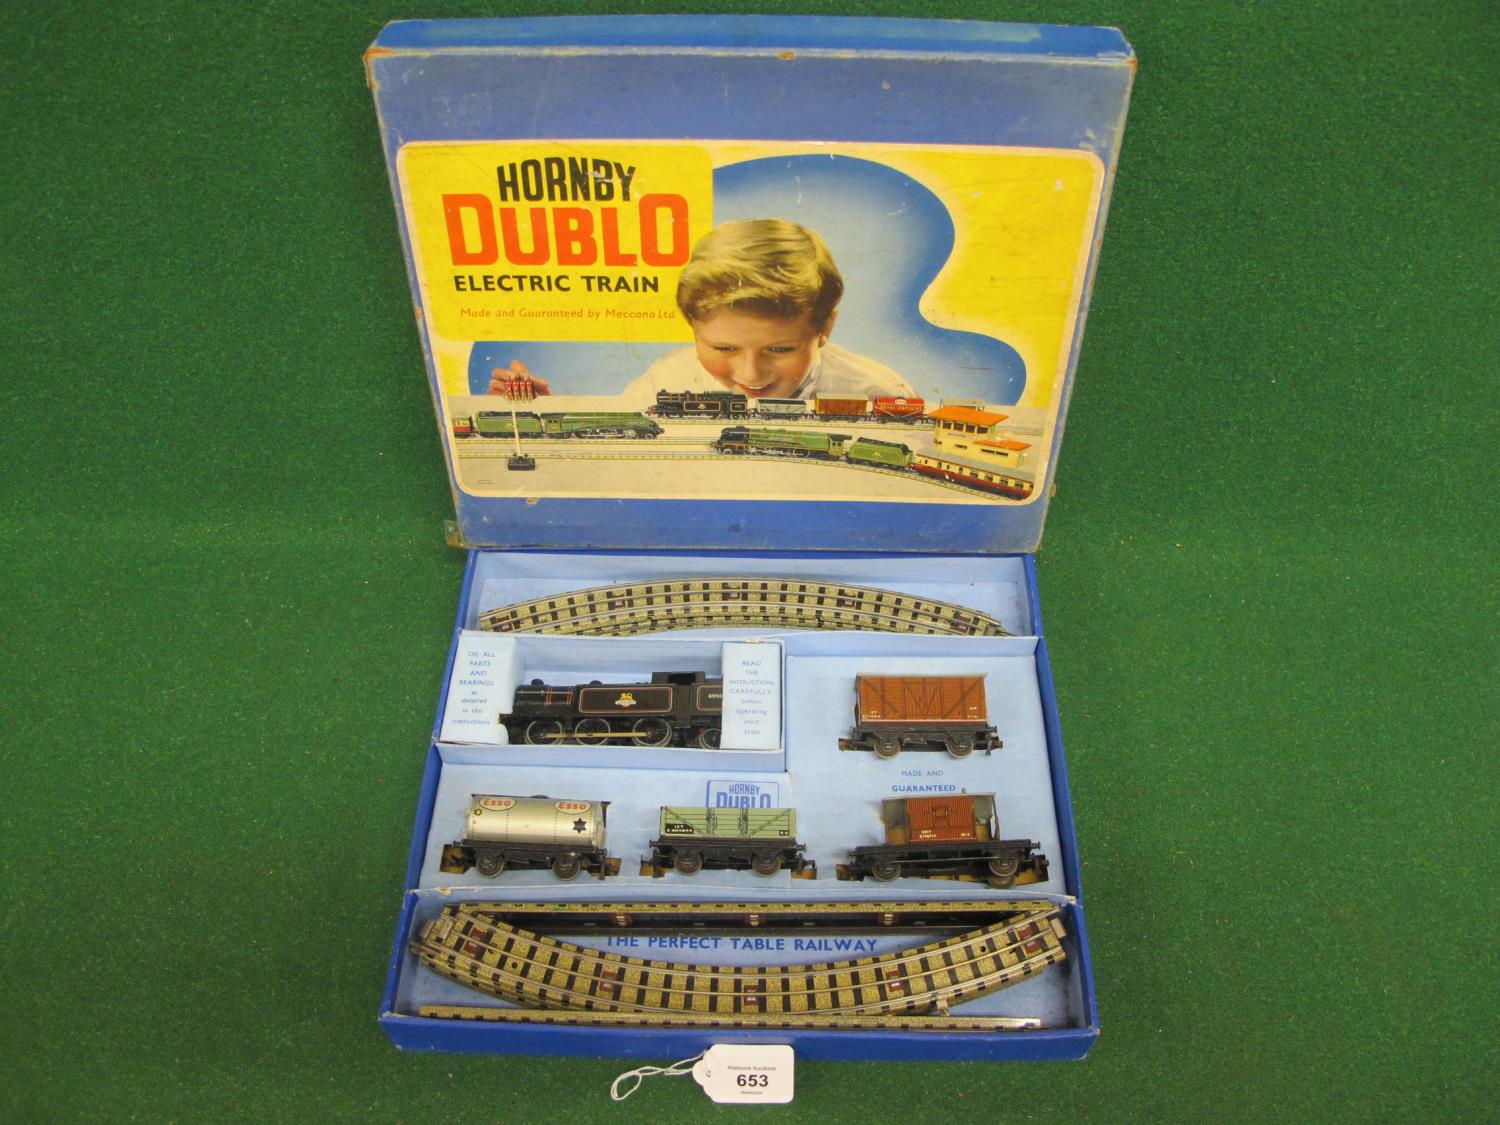 1950's Hornby Dublo 3 Rail EDG17 BR Goods Train set containing: N2 0-6-2T No. 69567 in early BR